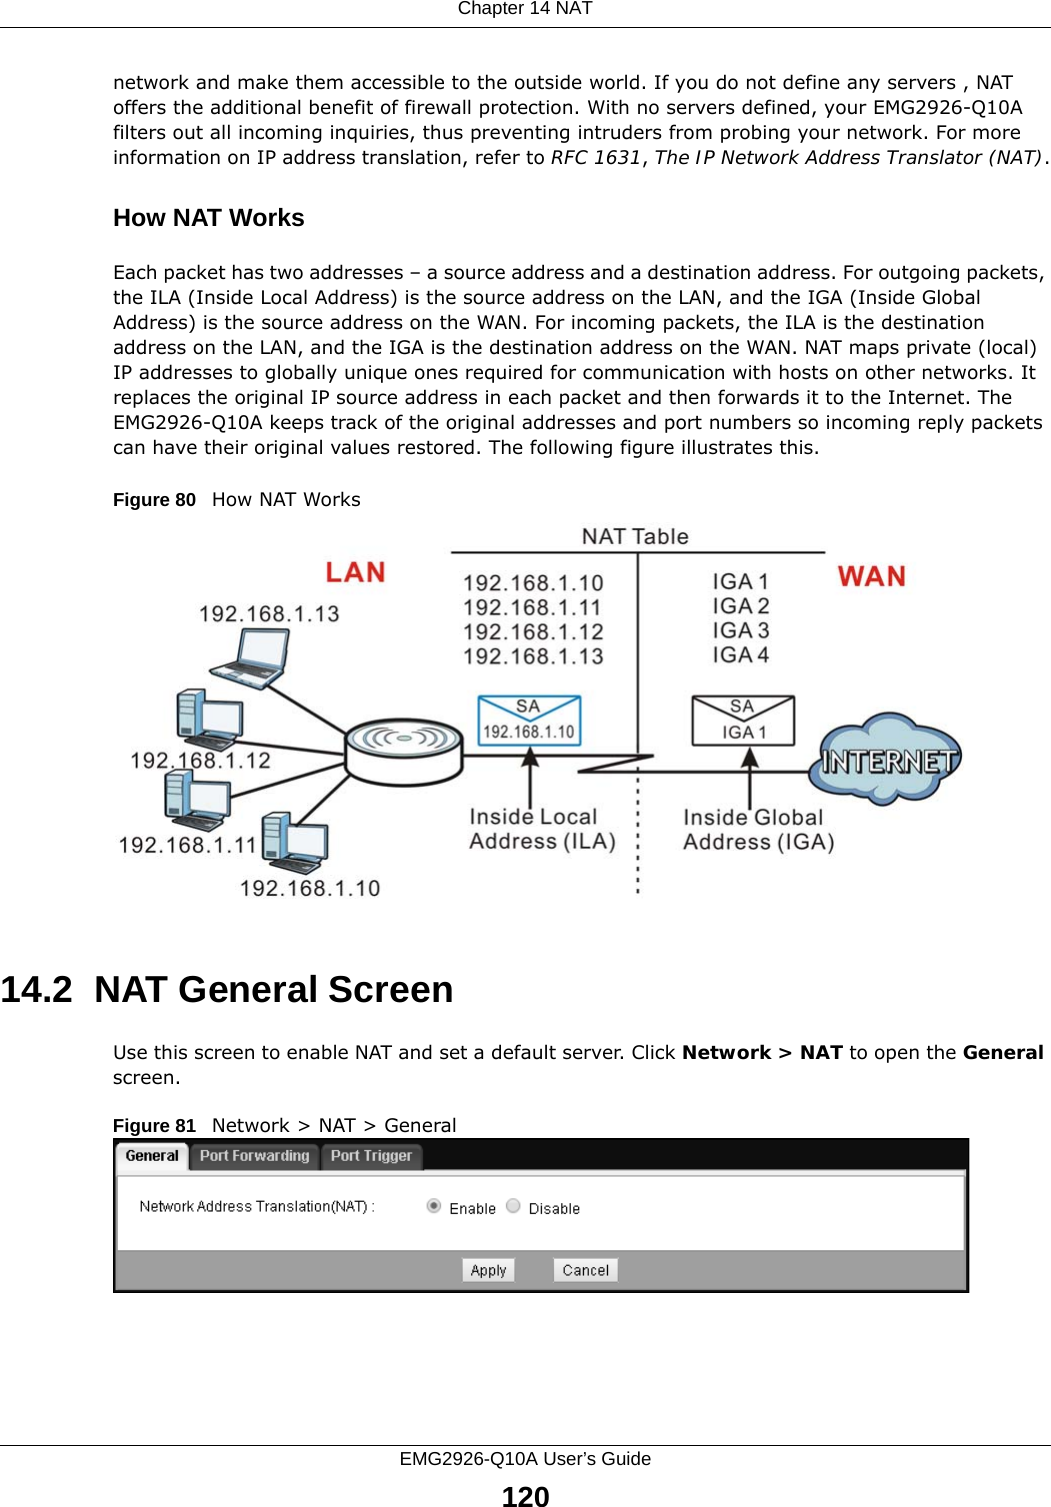 Chapter 14 NATEMG2926-Q10A User’s Guide120network and make them accessible to the outside world. If you do not define any servers , NAT offers the additional benefit of firewall protection. With no servers defined, your EMG2926-Q10A filters out all incoming inquiries, thus preventing intruders from probing your network. For more information on IP address translation, refer to RFC 1631, The IP Network Address Translator (NAT).How NAT WorksEach packet has two addresses – a source address and a destination address. For outgoing packets, the ILA (Inside Local Address) is the source address on the LAN, and the IGA (Inside Global Address) is the source address on the WAN. For incoming packets, the ILA is the destination address on the LAN, and the IGA is the destination address on the WAN. NAT maps private (local) IP addresses to globally unique ones required for communication with hosts on other networks. It replaces the original IP source address in each packet and then forwards it to the Internet. The EMG2926-Q10A keeps track of the original addresses and port numbers so incoming reply packets can have their original values restored. The following figure illustrates this.Figure 80   How NAT Works14.2  NAT General ScreenUse this screen to enable NAT and set a default server. Click Network &gt; NAT to open the General screen.Figure 81   Network &gt; NAT &gt; General 